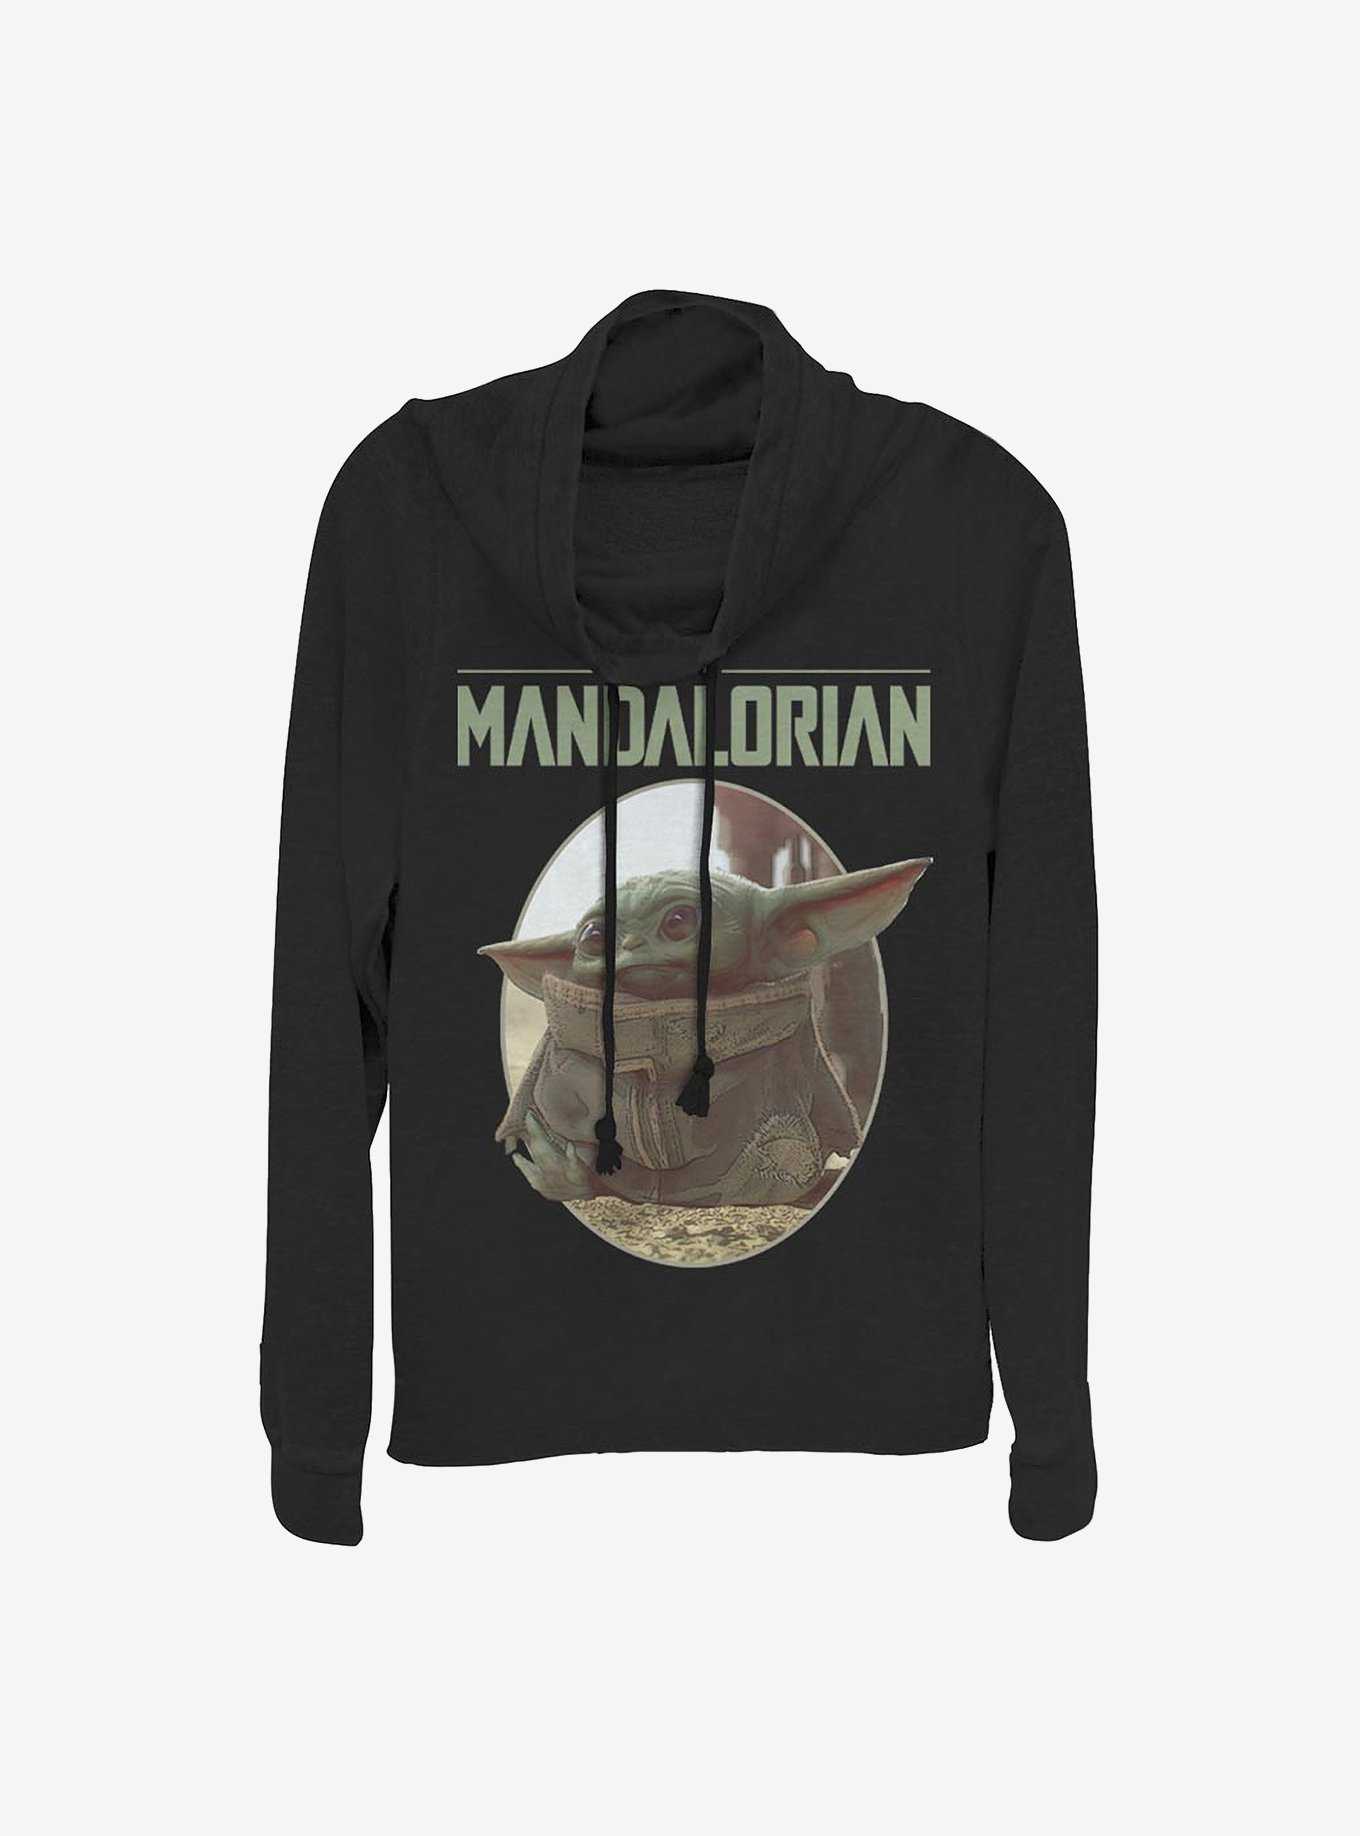 Star Wars The Mandalorian The Child Look Cowlneck Long-Sleeve Girls Top, , hi-res